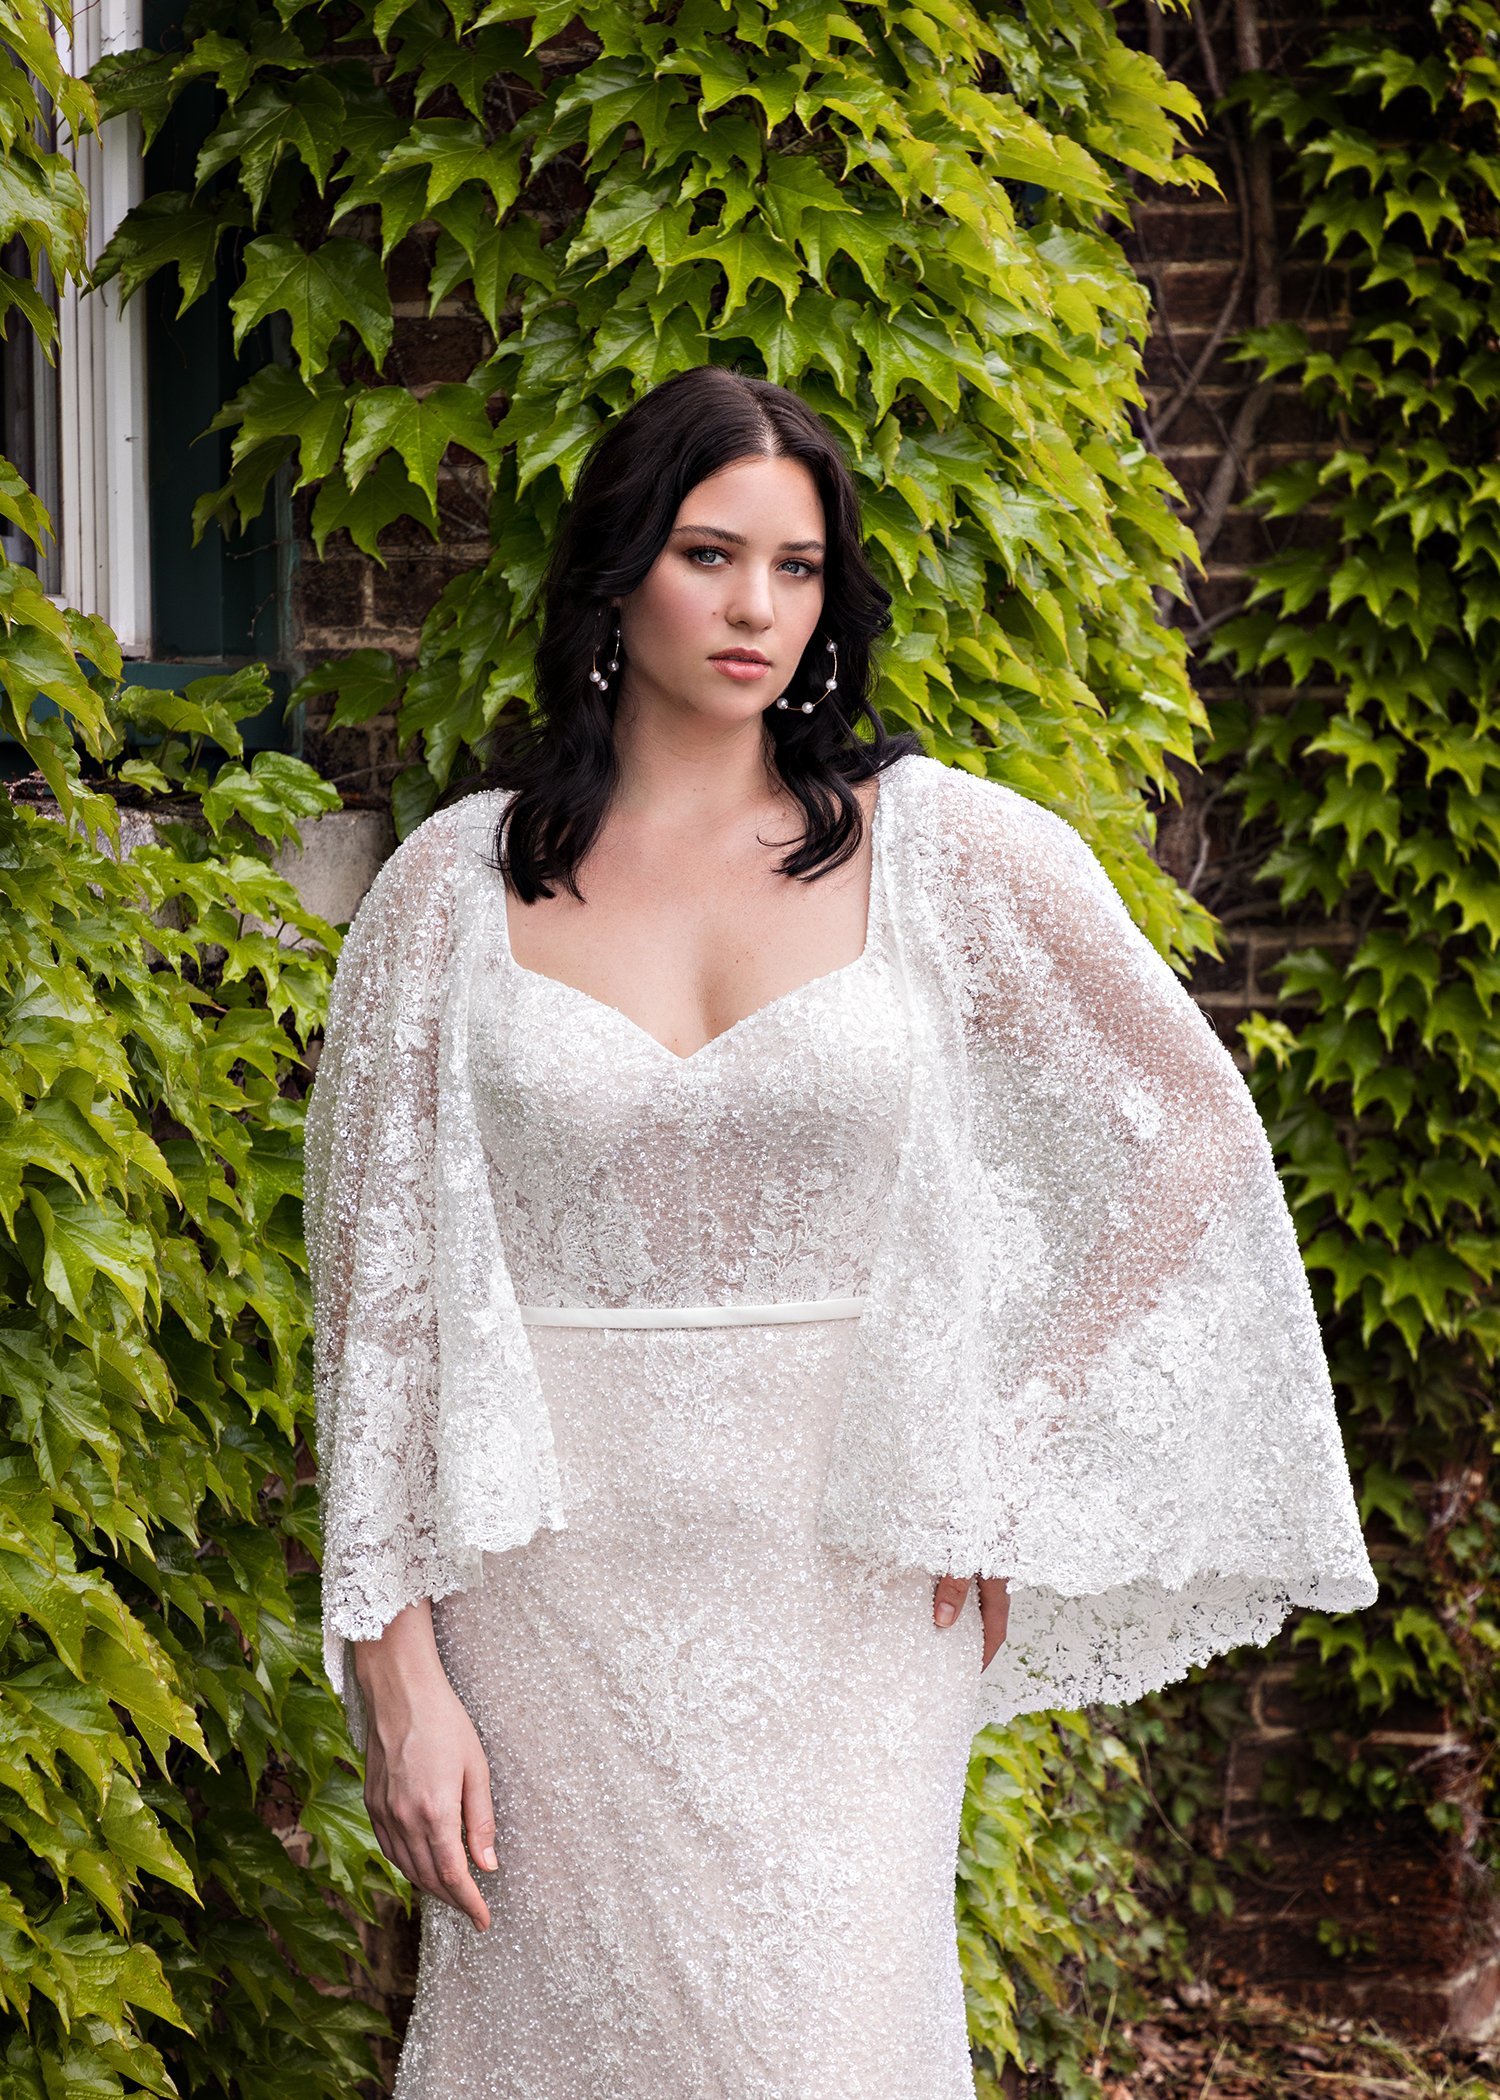 Dany-Tabet-Girl-Bridal-Plus-Size-Curvy-Wedding-Dresses-Indiana-Illinois-New-Jersey-Brides-by-Young-Layla.jpeg